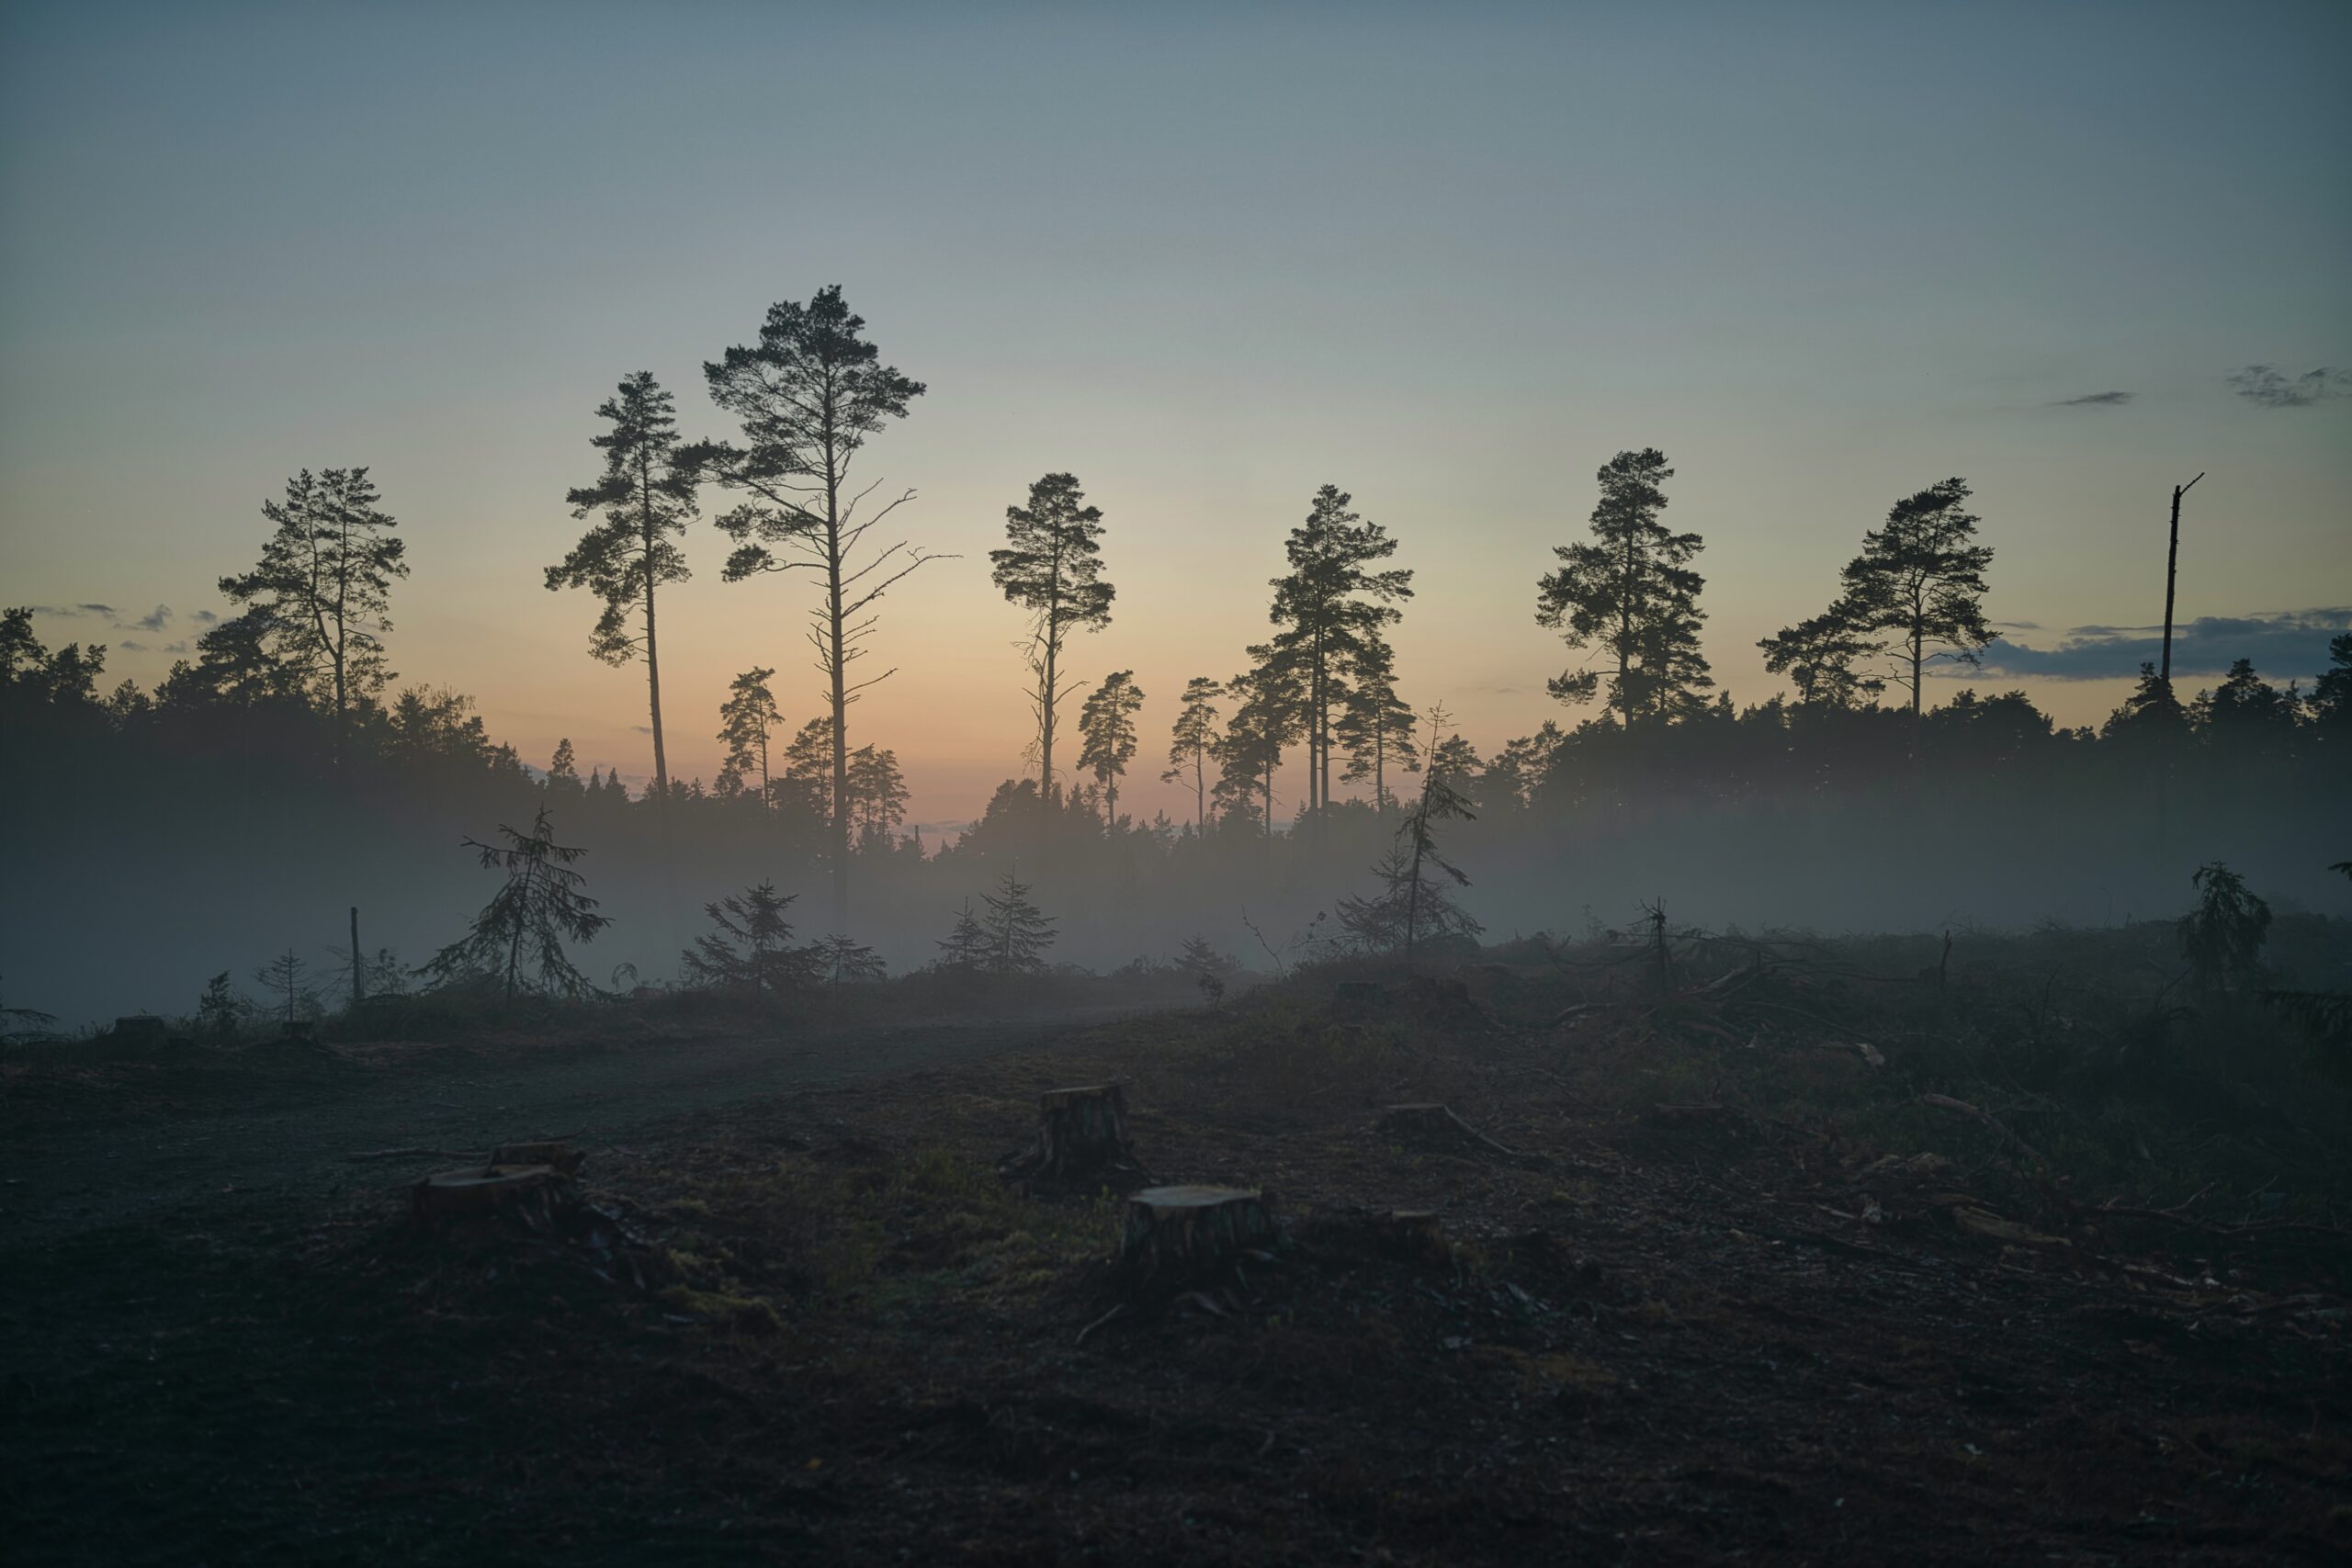 A field with trees cut down and burnt, the image evokes deforestation.